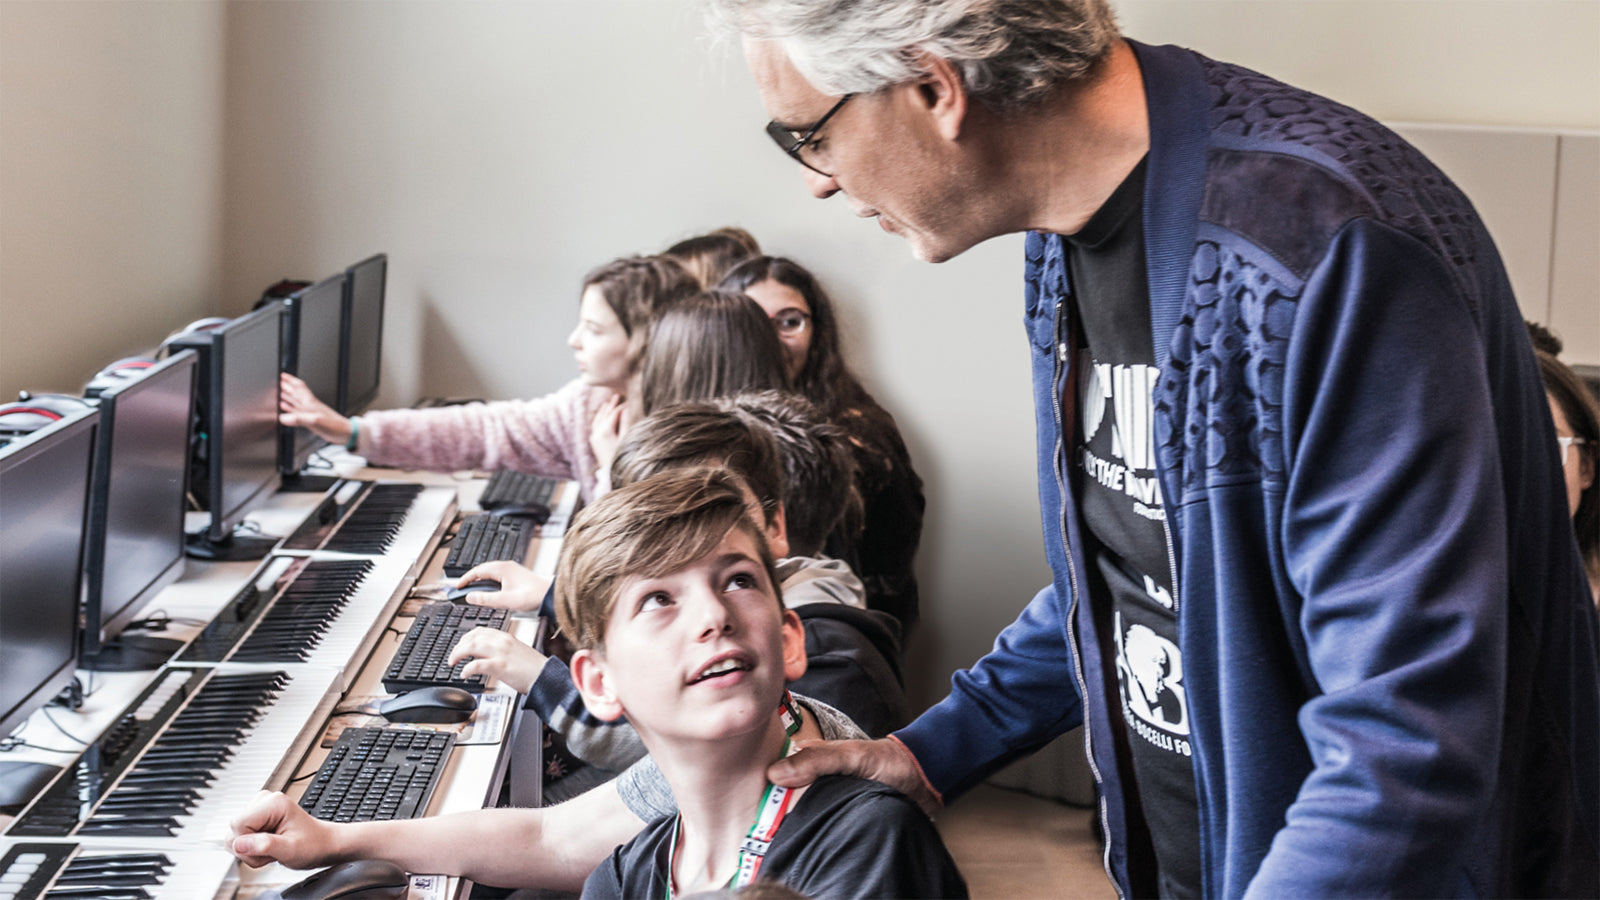 Andrea Bocelli speaking to a young boy sitting in a computer lab.